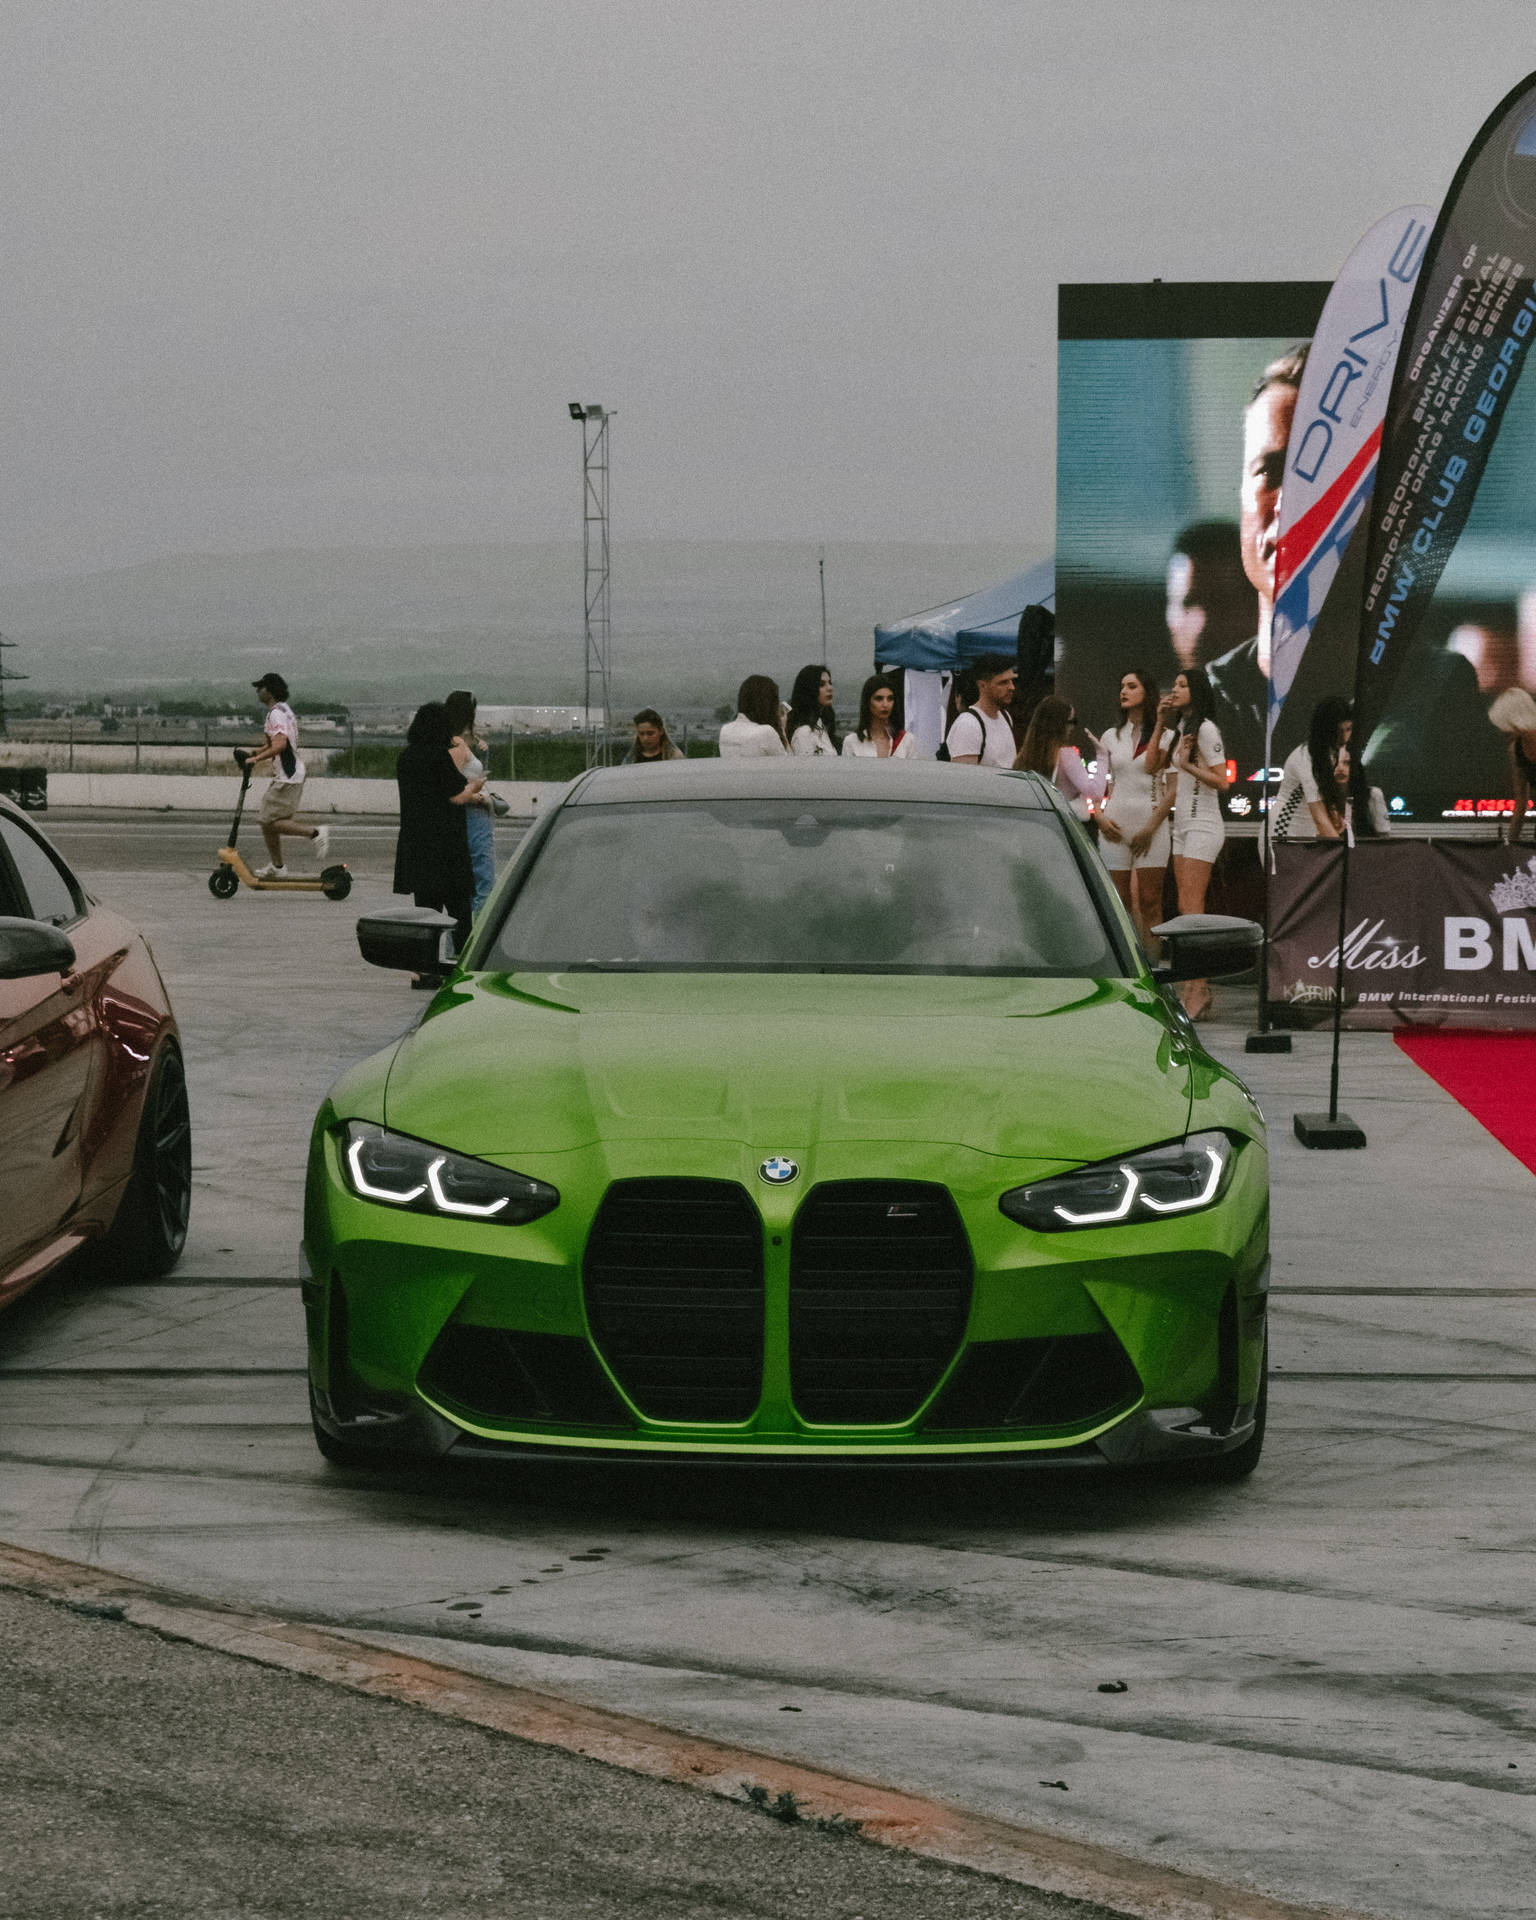 Green Bmw G80 At Racing Track